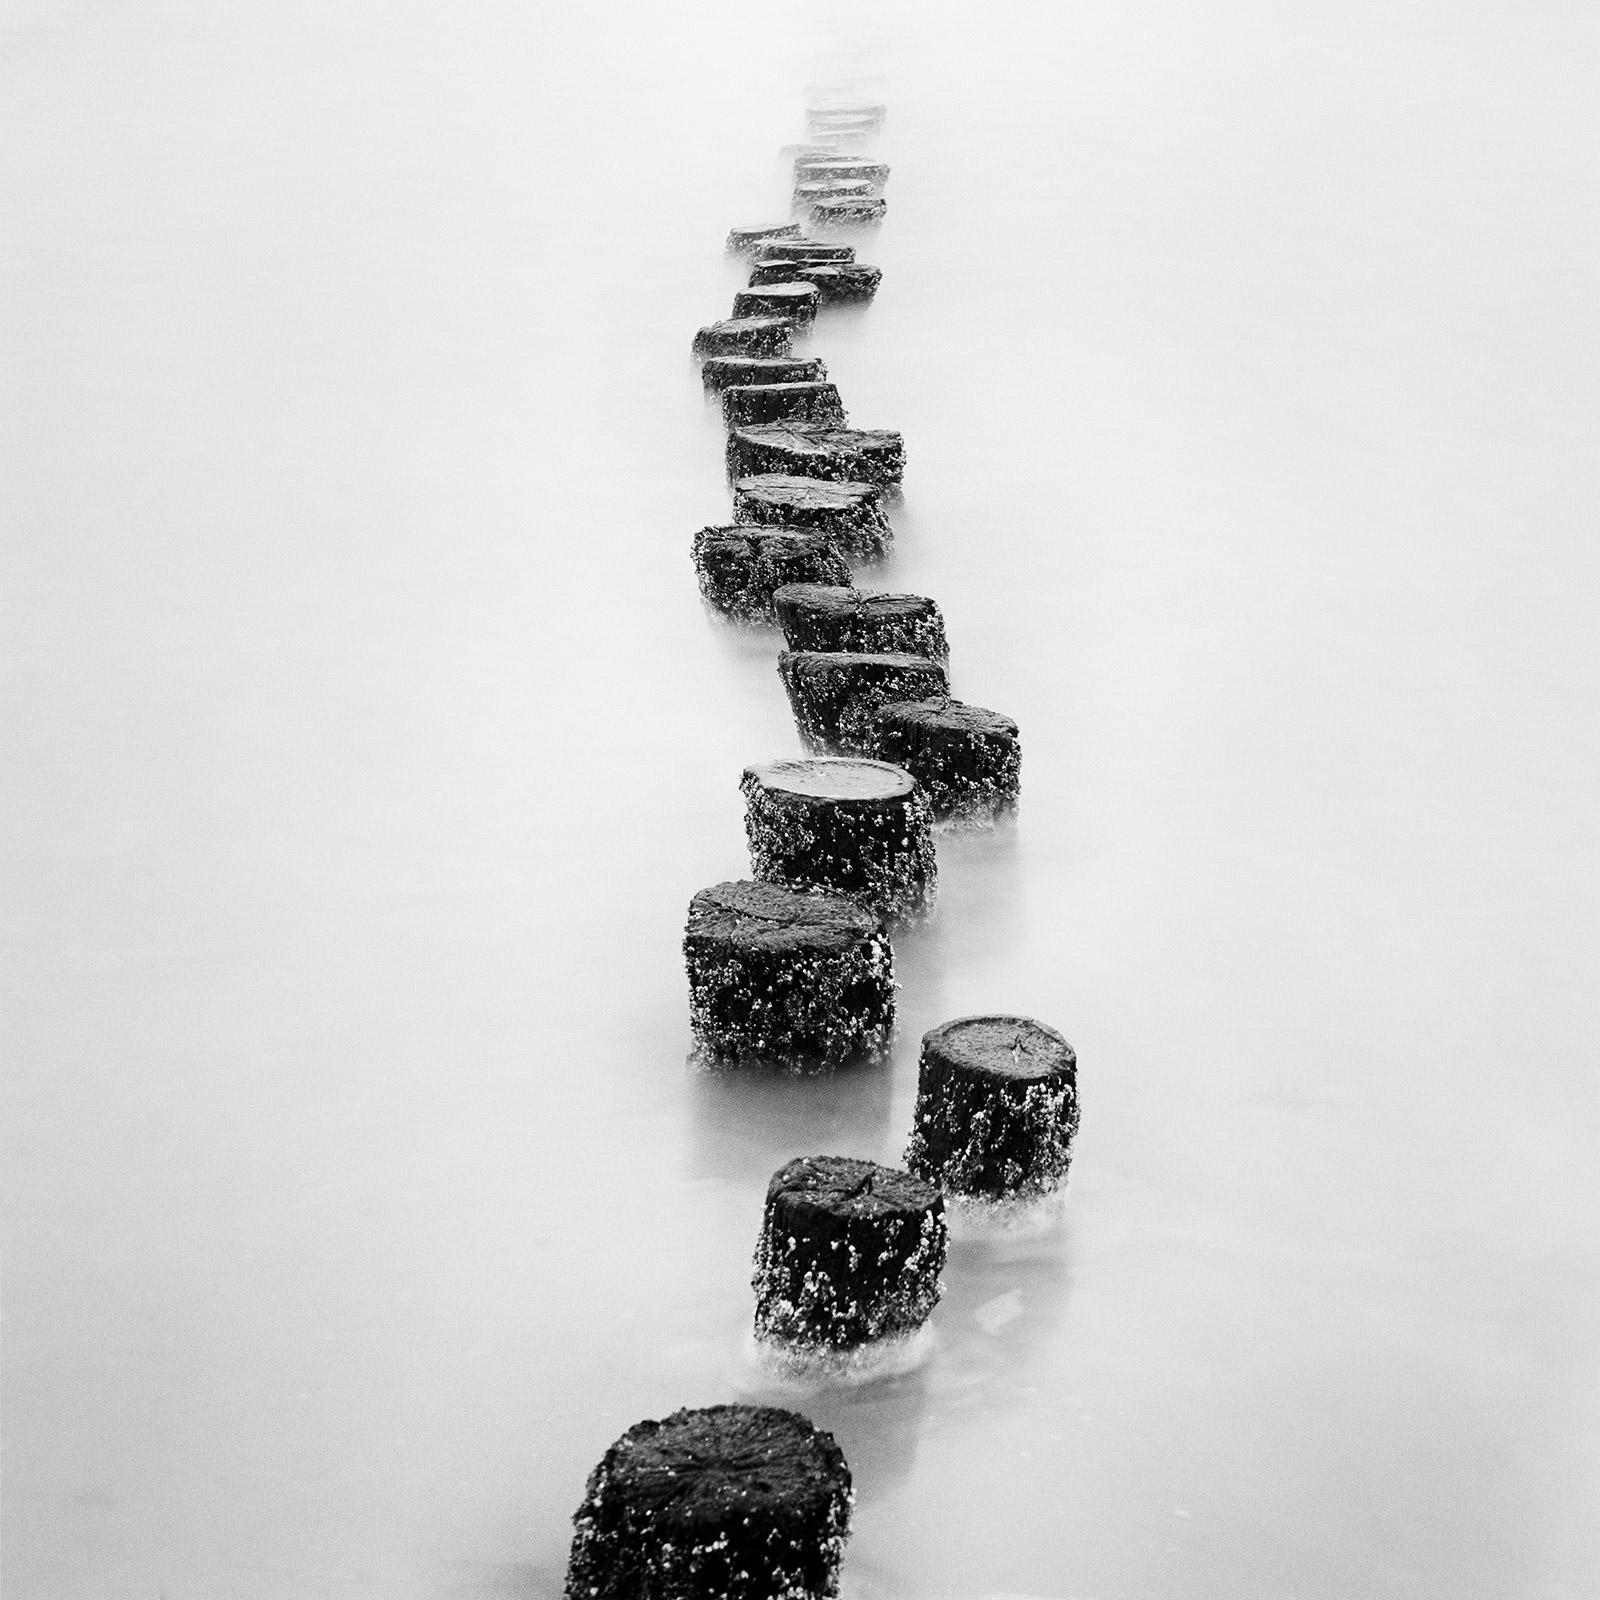 Wooden Pegs, long exposure, black and white, fine art, waterscape, photography